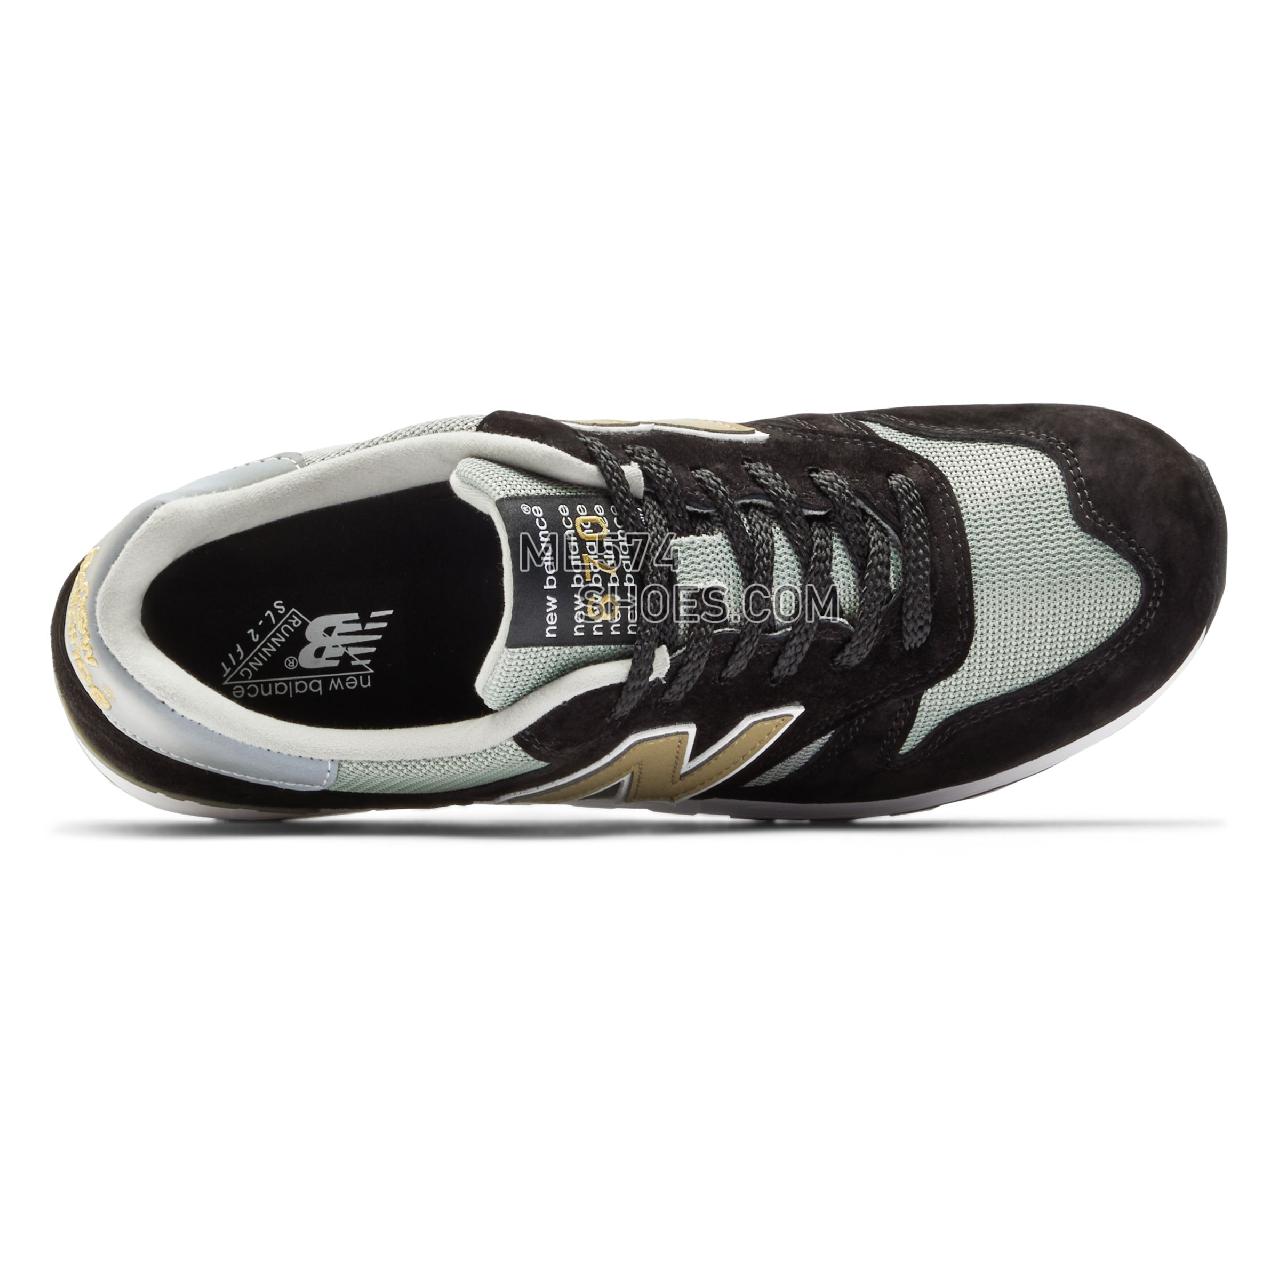 New Balance MADE in UK 670 - Men's Made in USA And UK Sneakers - black grey gold - M670KGW